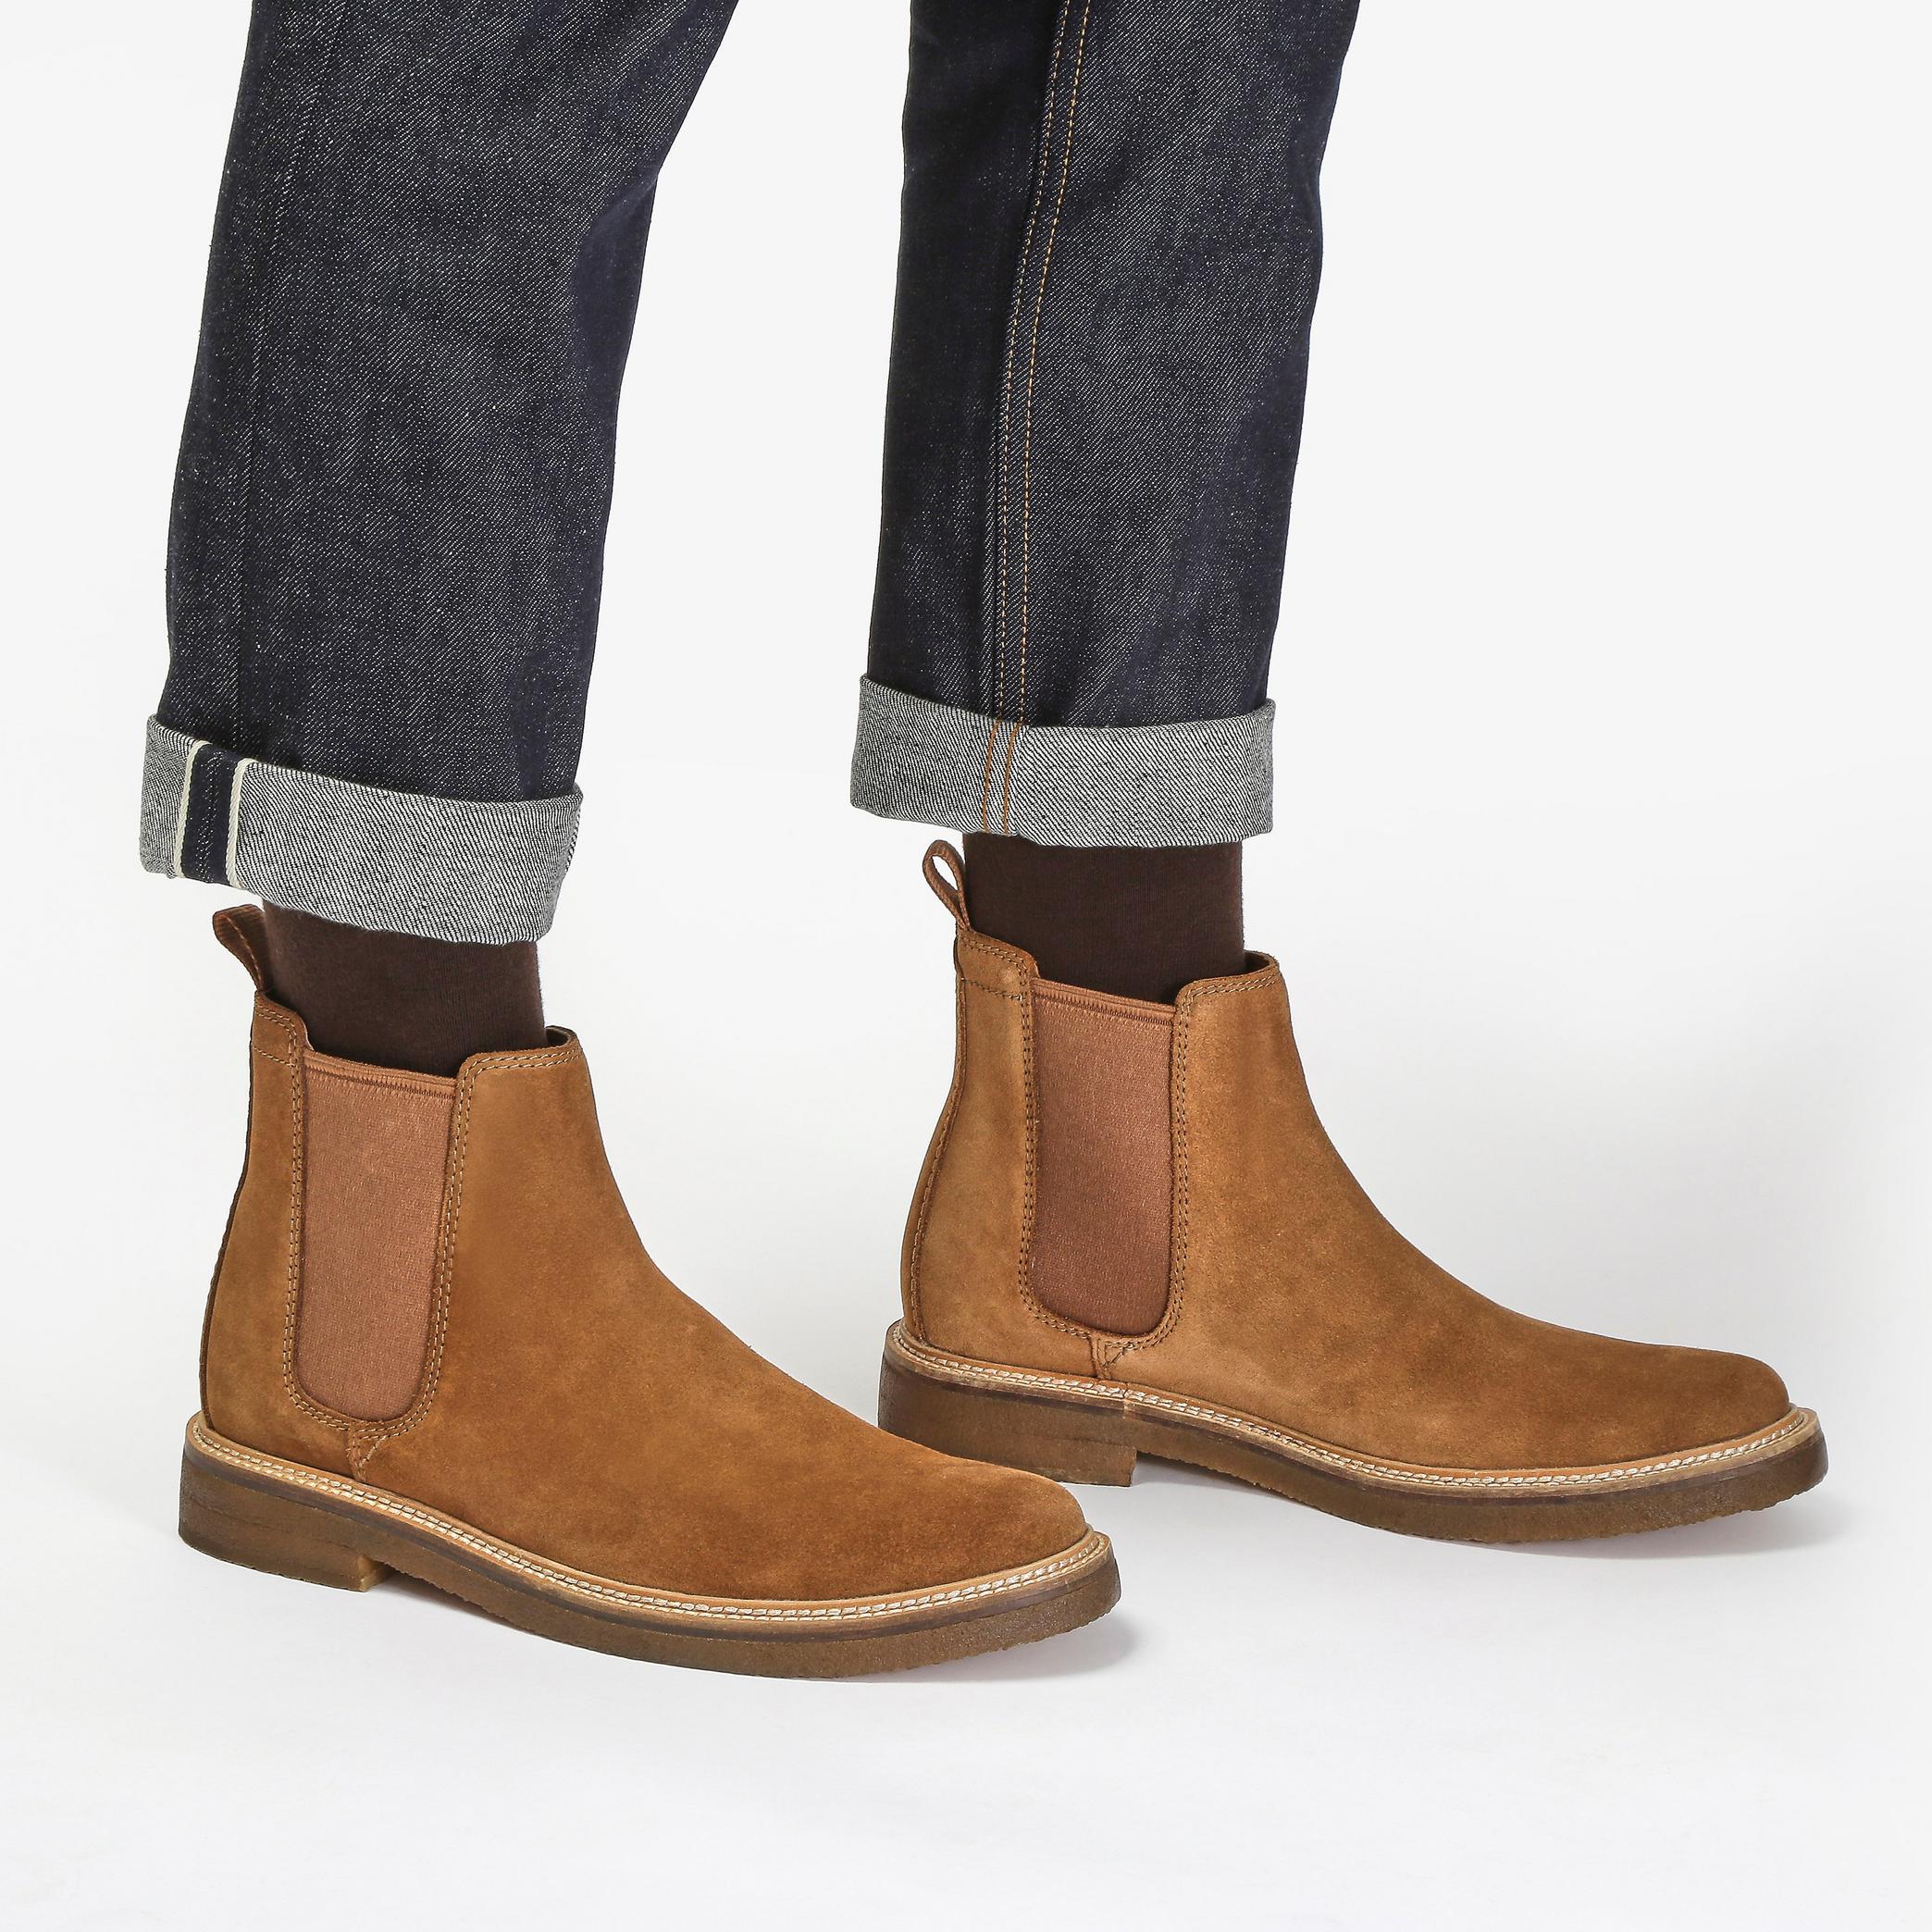 MENS Clarkdale Easy Cognac Suede Ankle Boots | Clarks UK